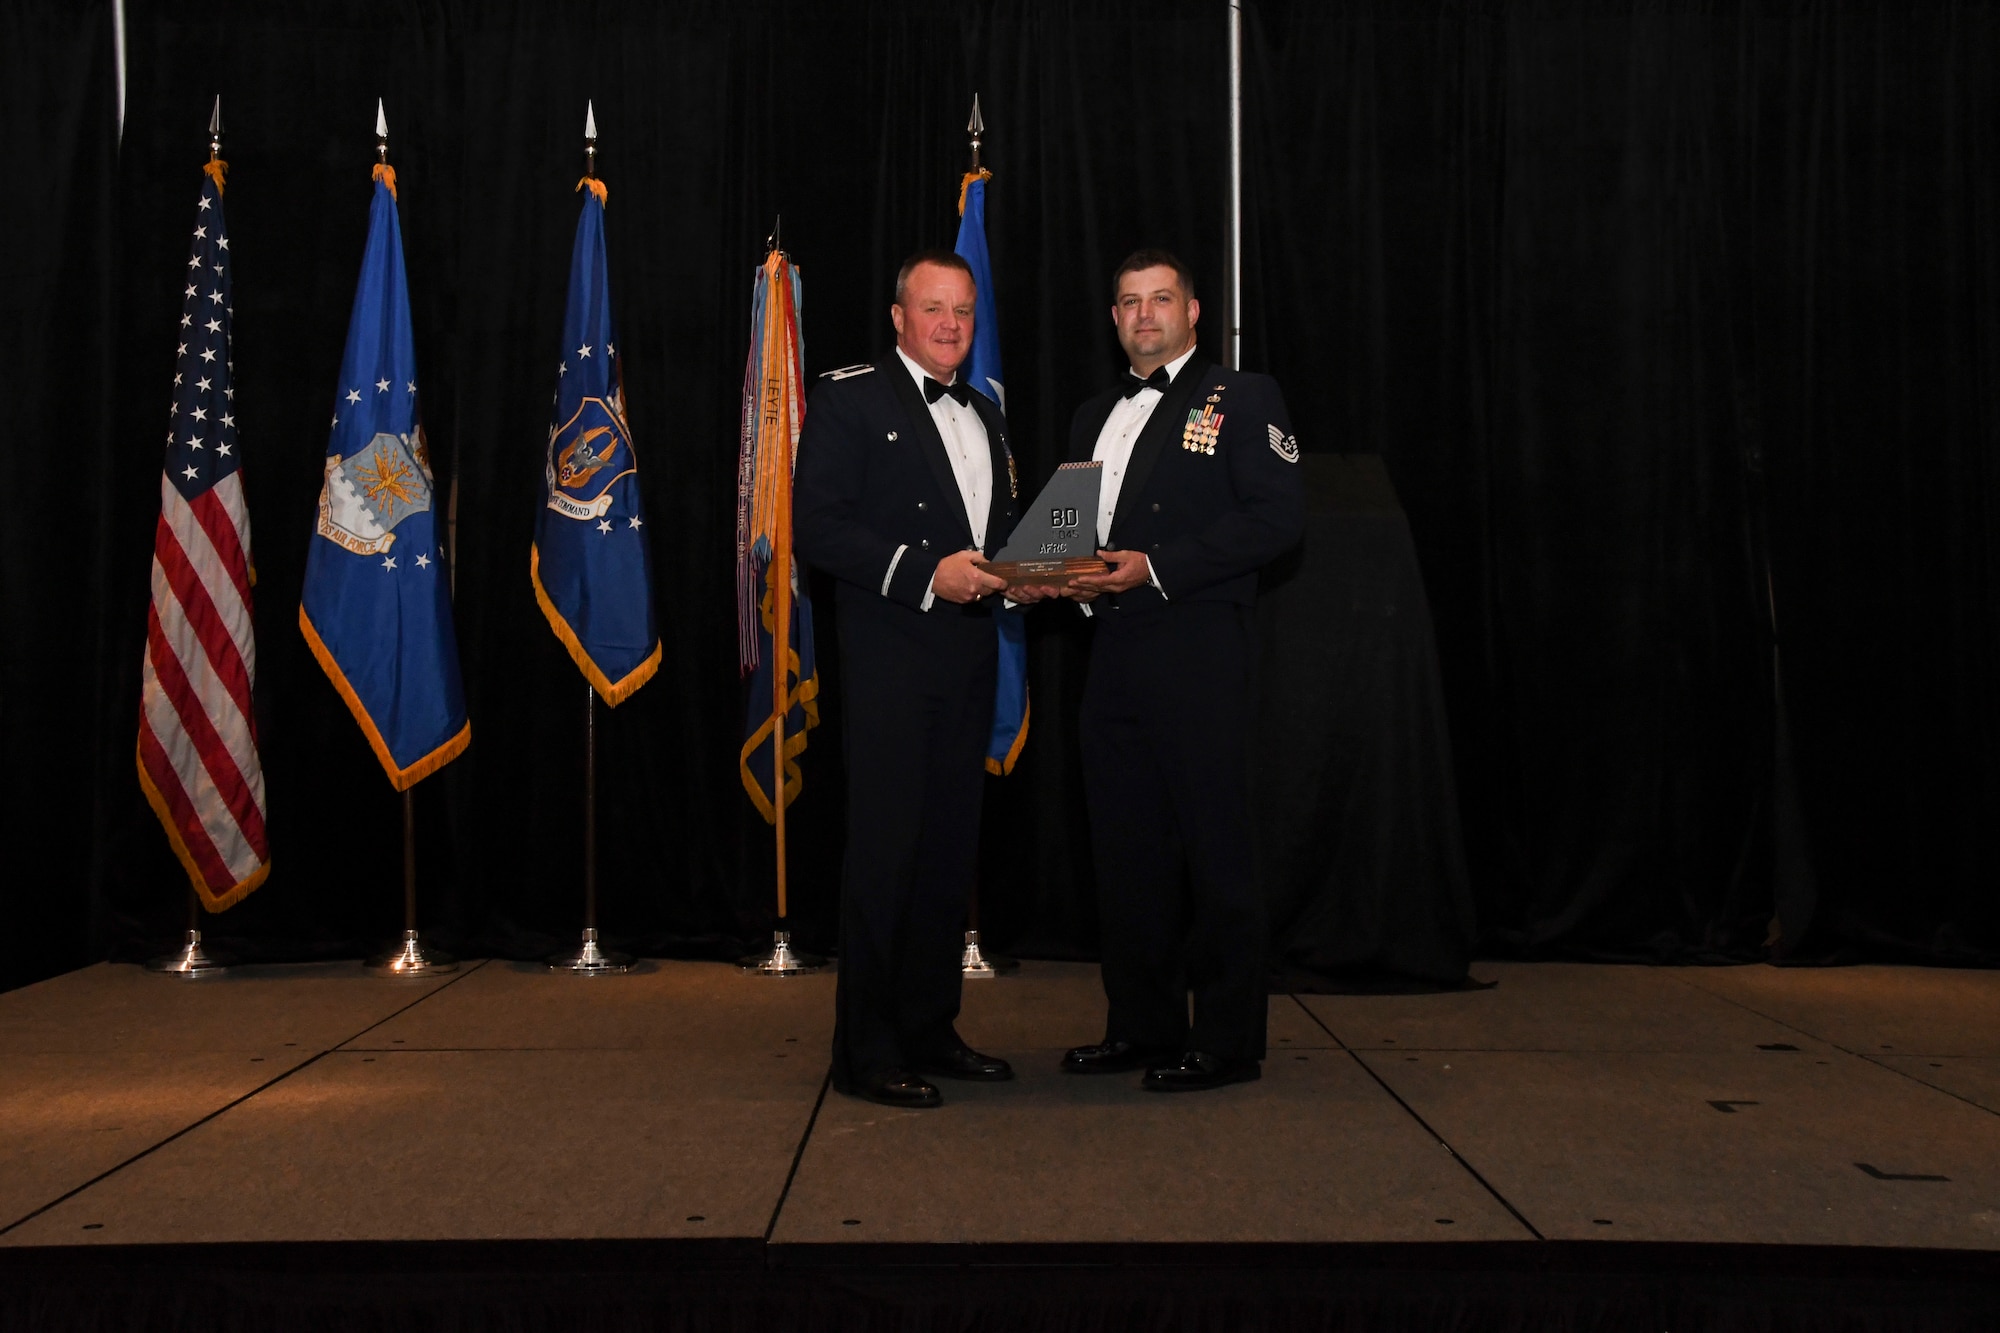 Col. Bruce R. Cox, 307th Bomb Wing commander, presents Tech. Sgt. Marvin Bell, 307th Operations Support Squadron, the 307th Bomb Wing’s Non-Commissioned Officer of the Year award for 2016. The award was presented during the 307th Bomb Wing’s 75th Anniversary and Awards Gala at the Shreveport Convention Center April 1, 2017. (U.S. Air Force photo by Staff Sgt. Callie Ware/Released)